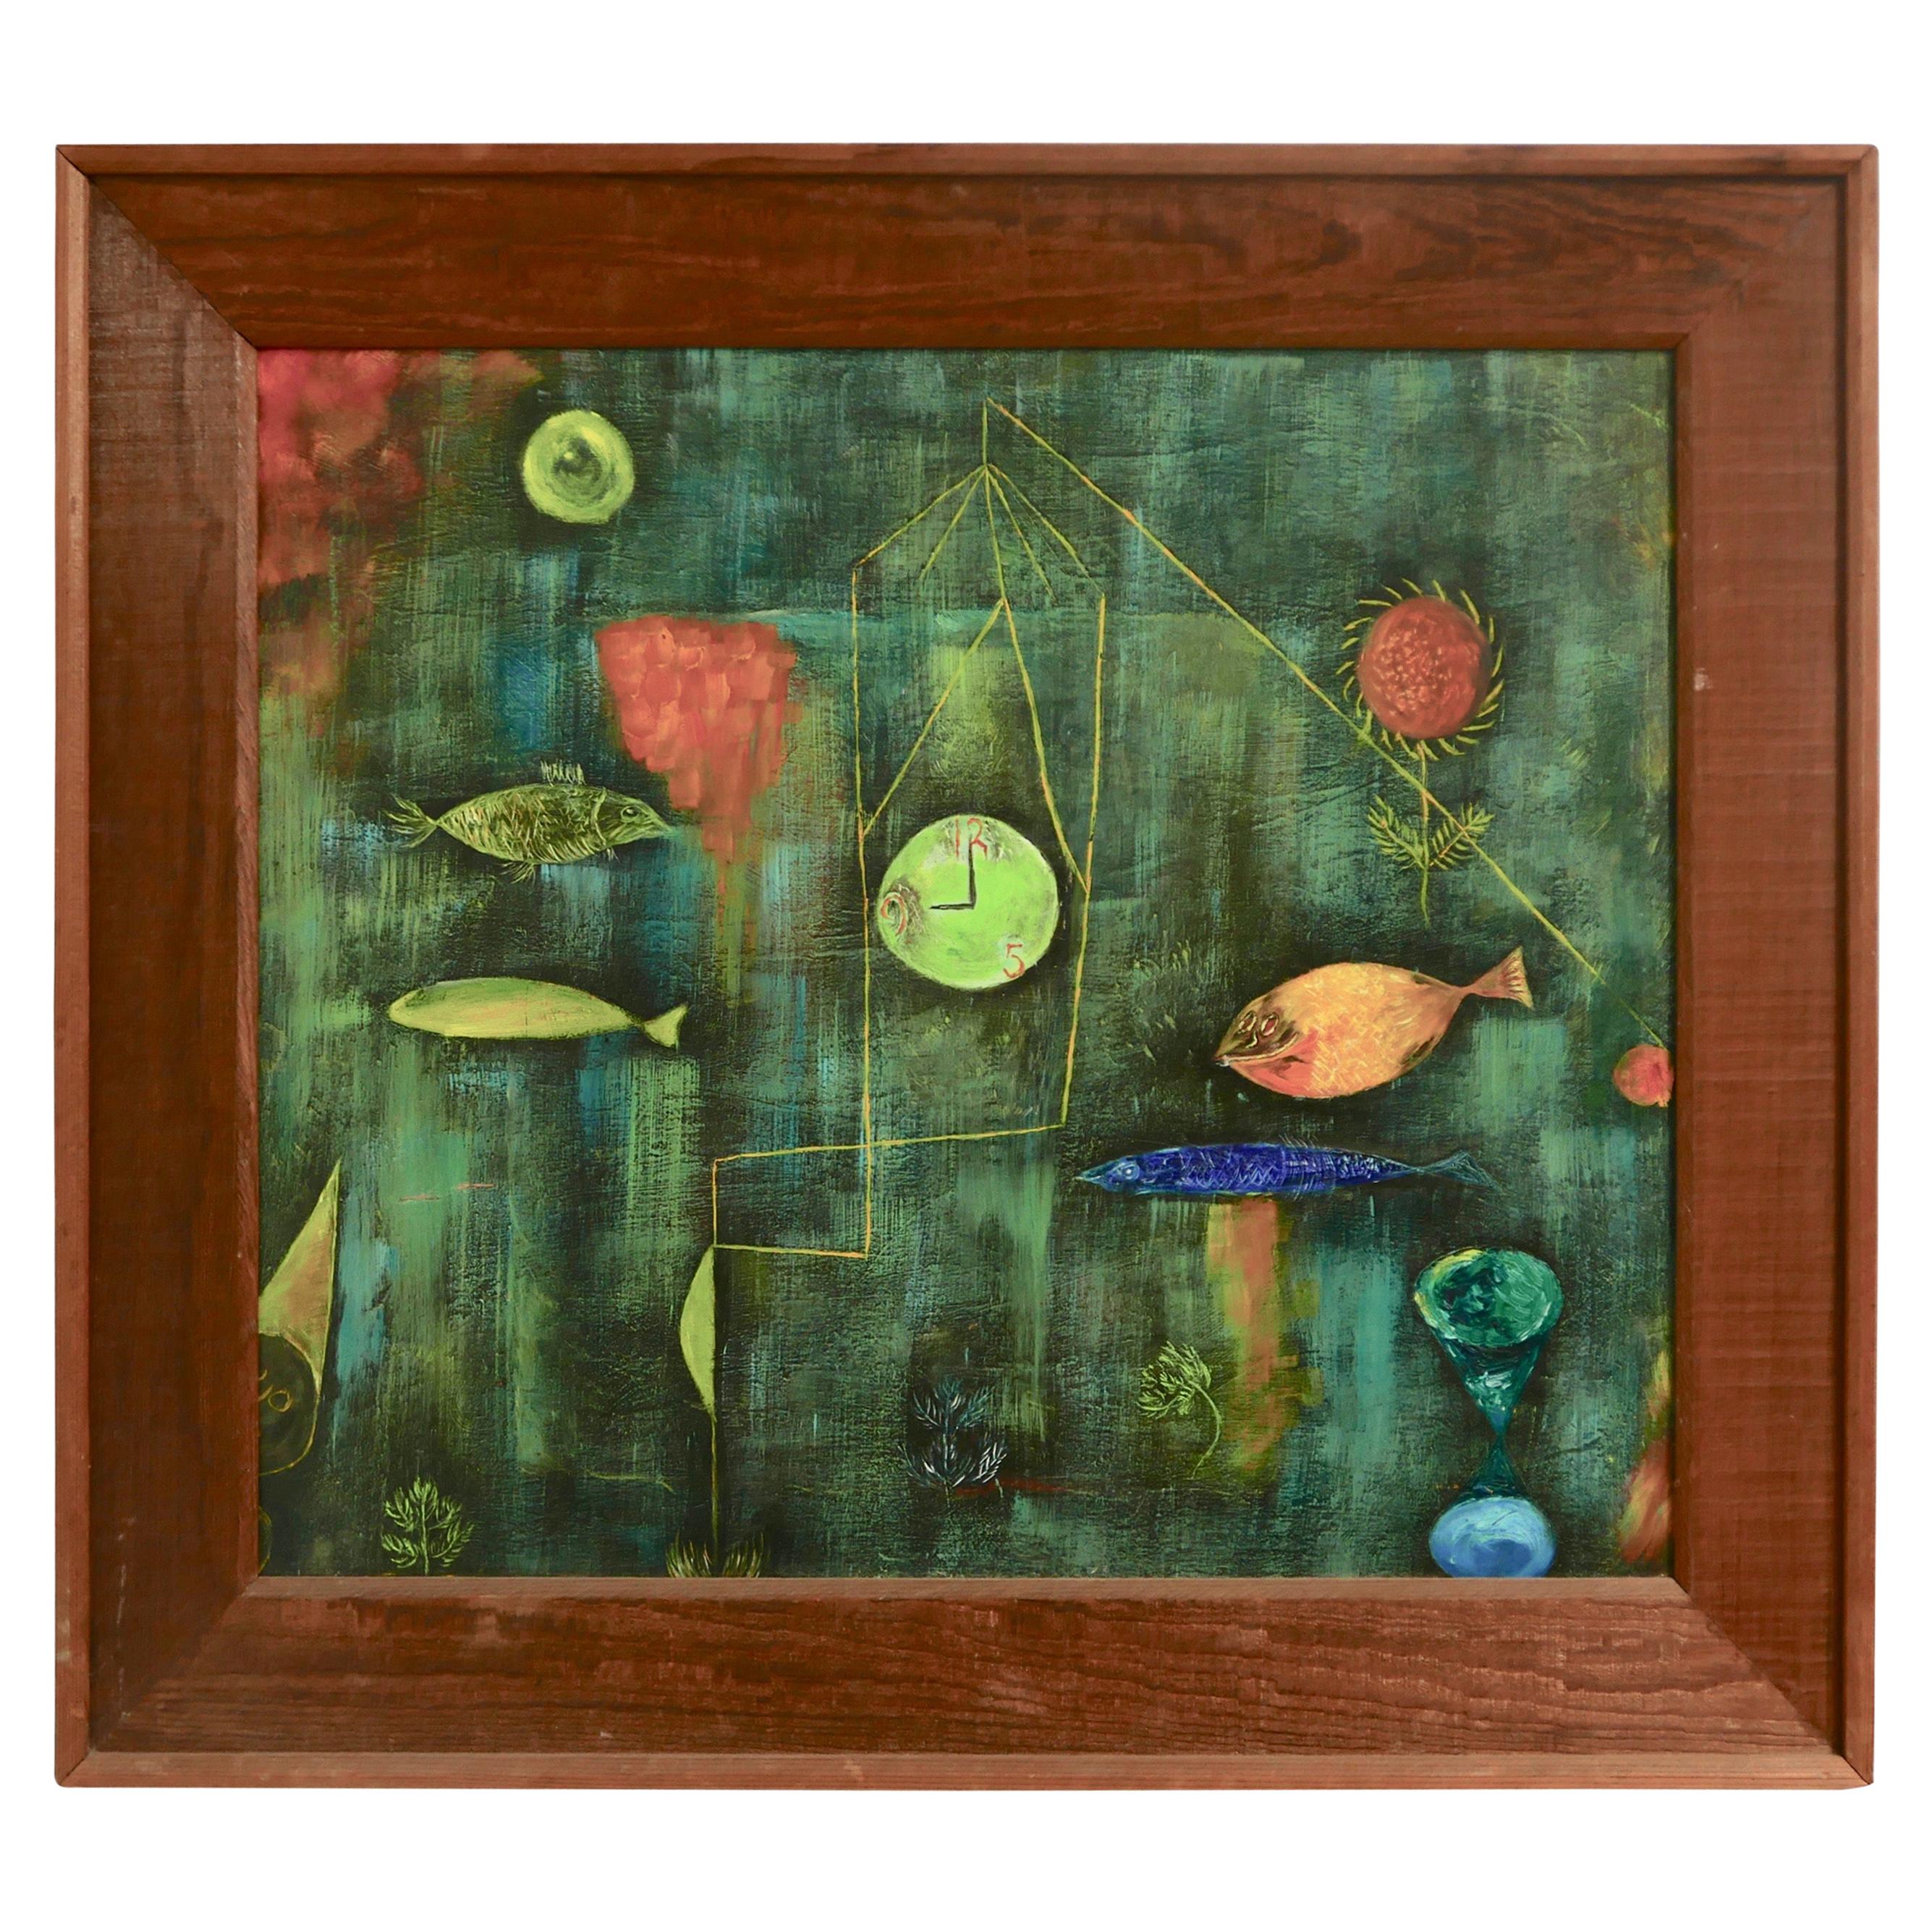  American Dreamlike Surrealist / Abstract Underwater Painting in Rustic Frame For Sale